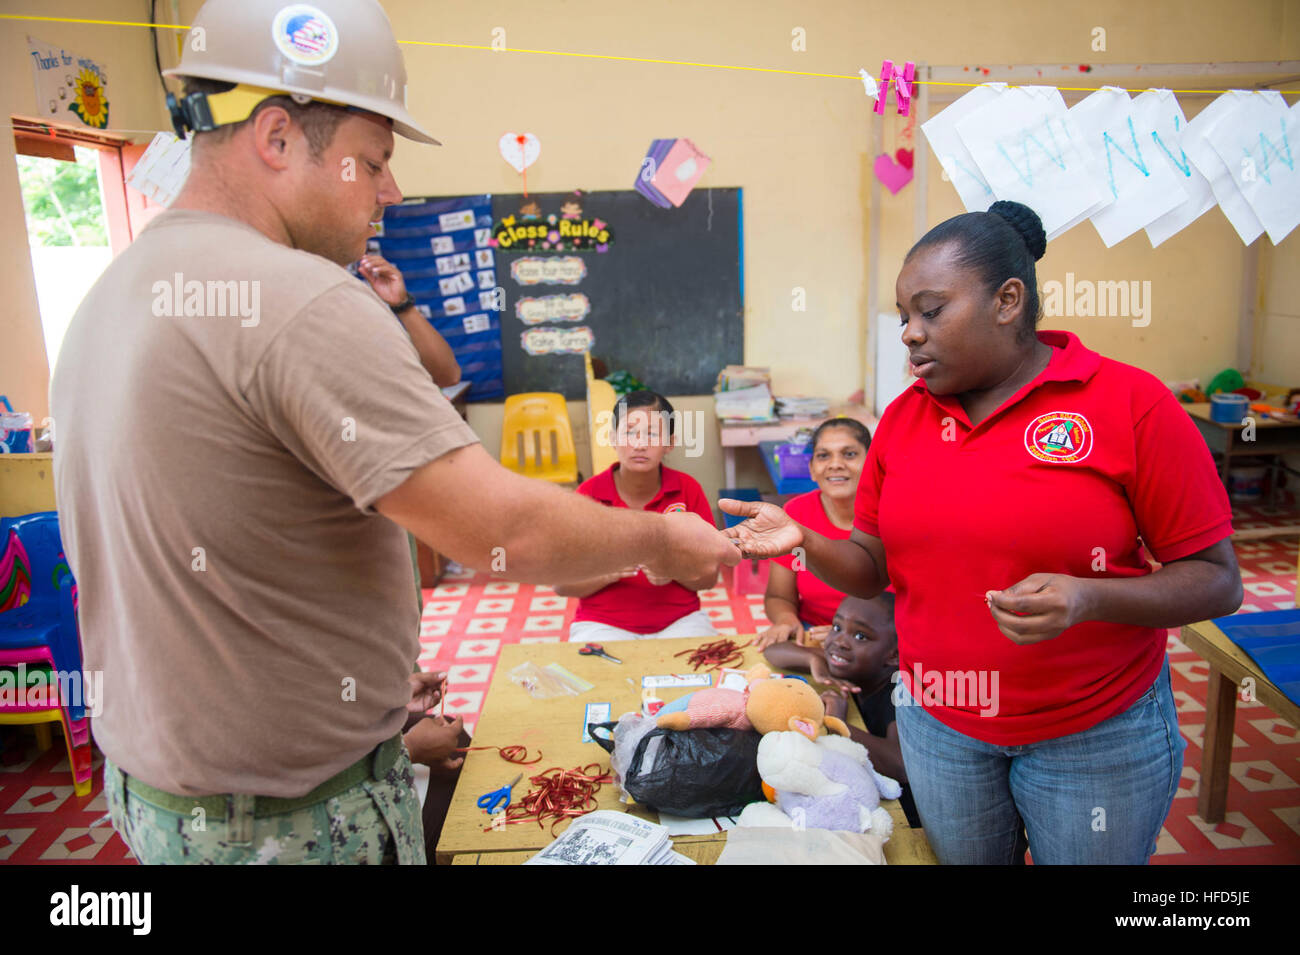 U.S. Navy Builder 2nd Class Adam Jones gives school teacher Alida Kimberly Warrior a challenge coin at Bethel SDA School during Southern Partnership Station 2014 (SPS-JHSV 14). Southern Partnership Station 2014 is a U.S. Navy deployment focused on subject matter expert exchanges with partner nation militaries and security forces. U.S. Naval Forces Southern Command and U.S. 4th Fleet employ maritime forces in cooperative maritime security operations in order to maintain access, enhance interoperability, and build enduring partnerships that foster regional security in the U.S. Southern Command a Stock Photo